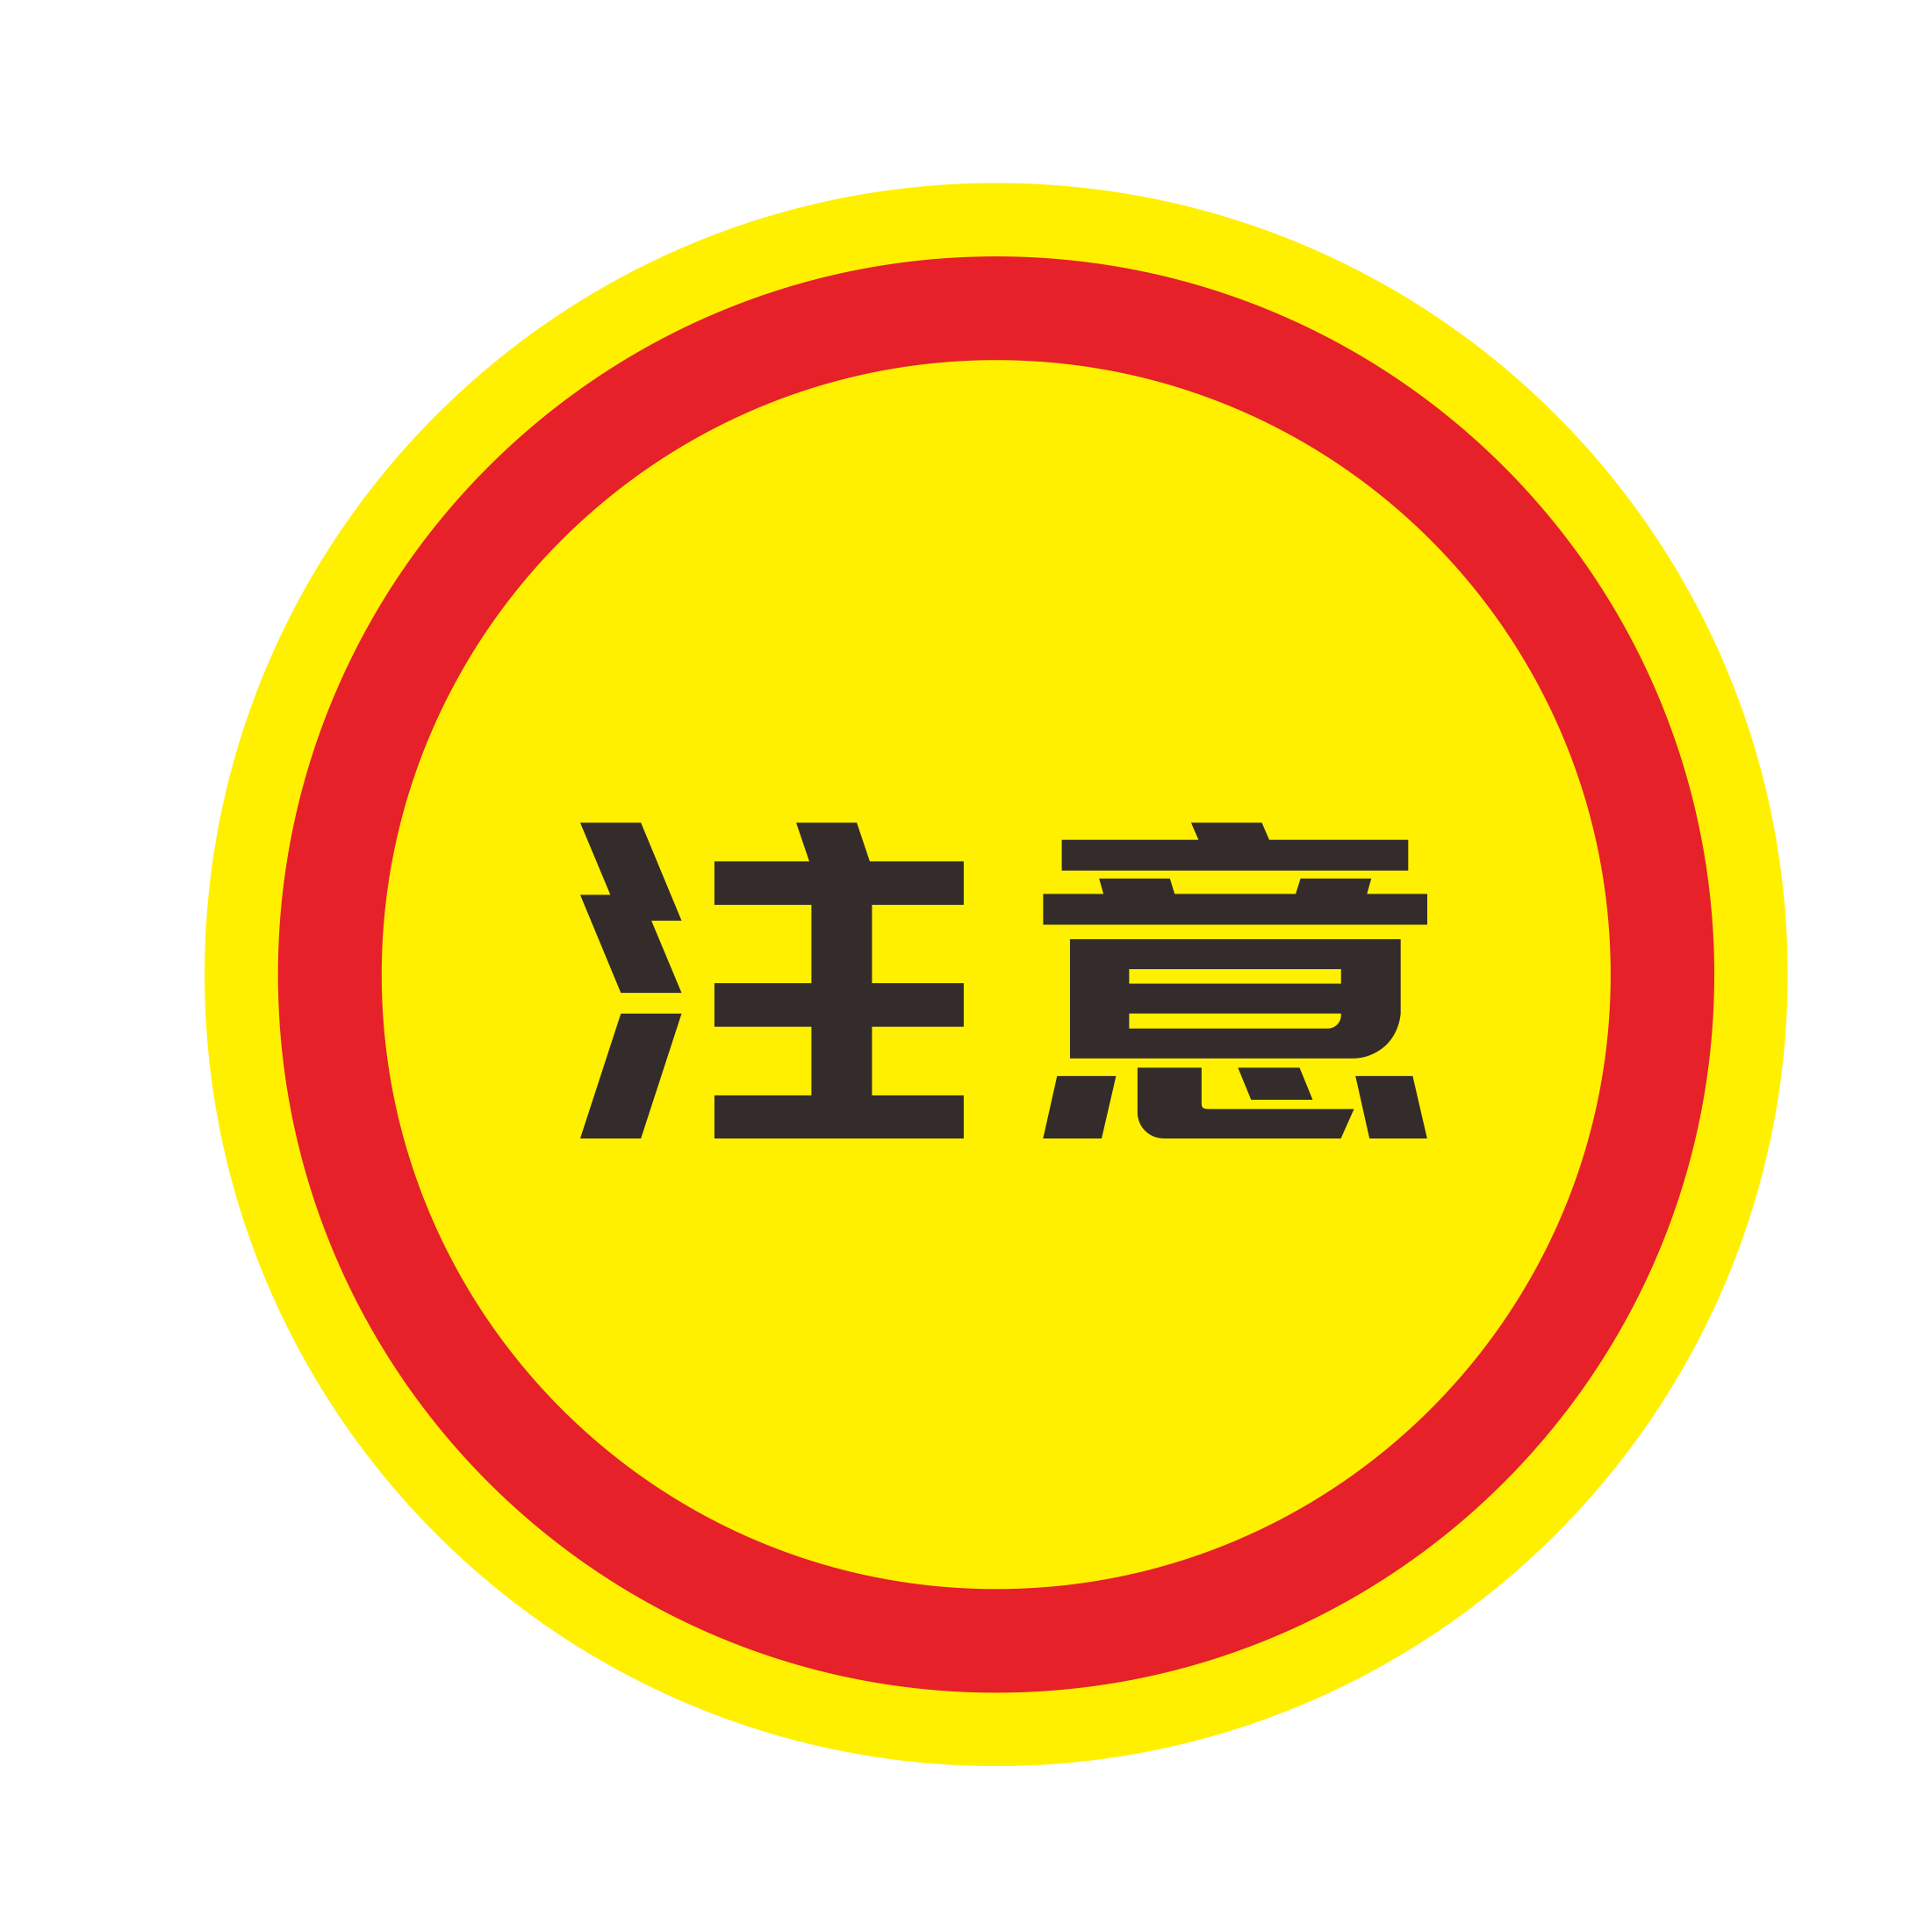 red yellow warning attention sign 4427928